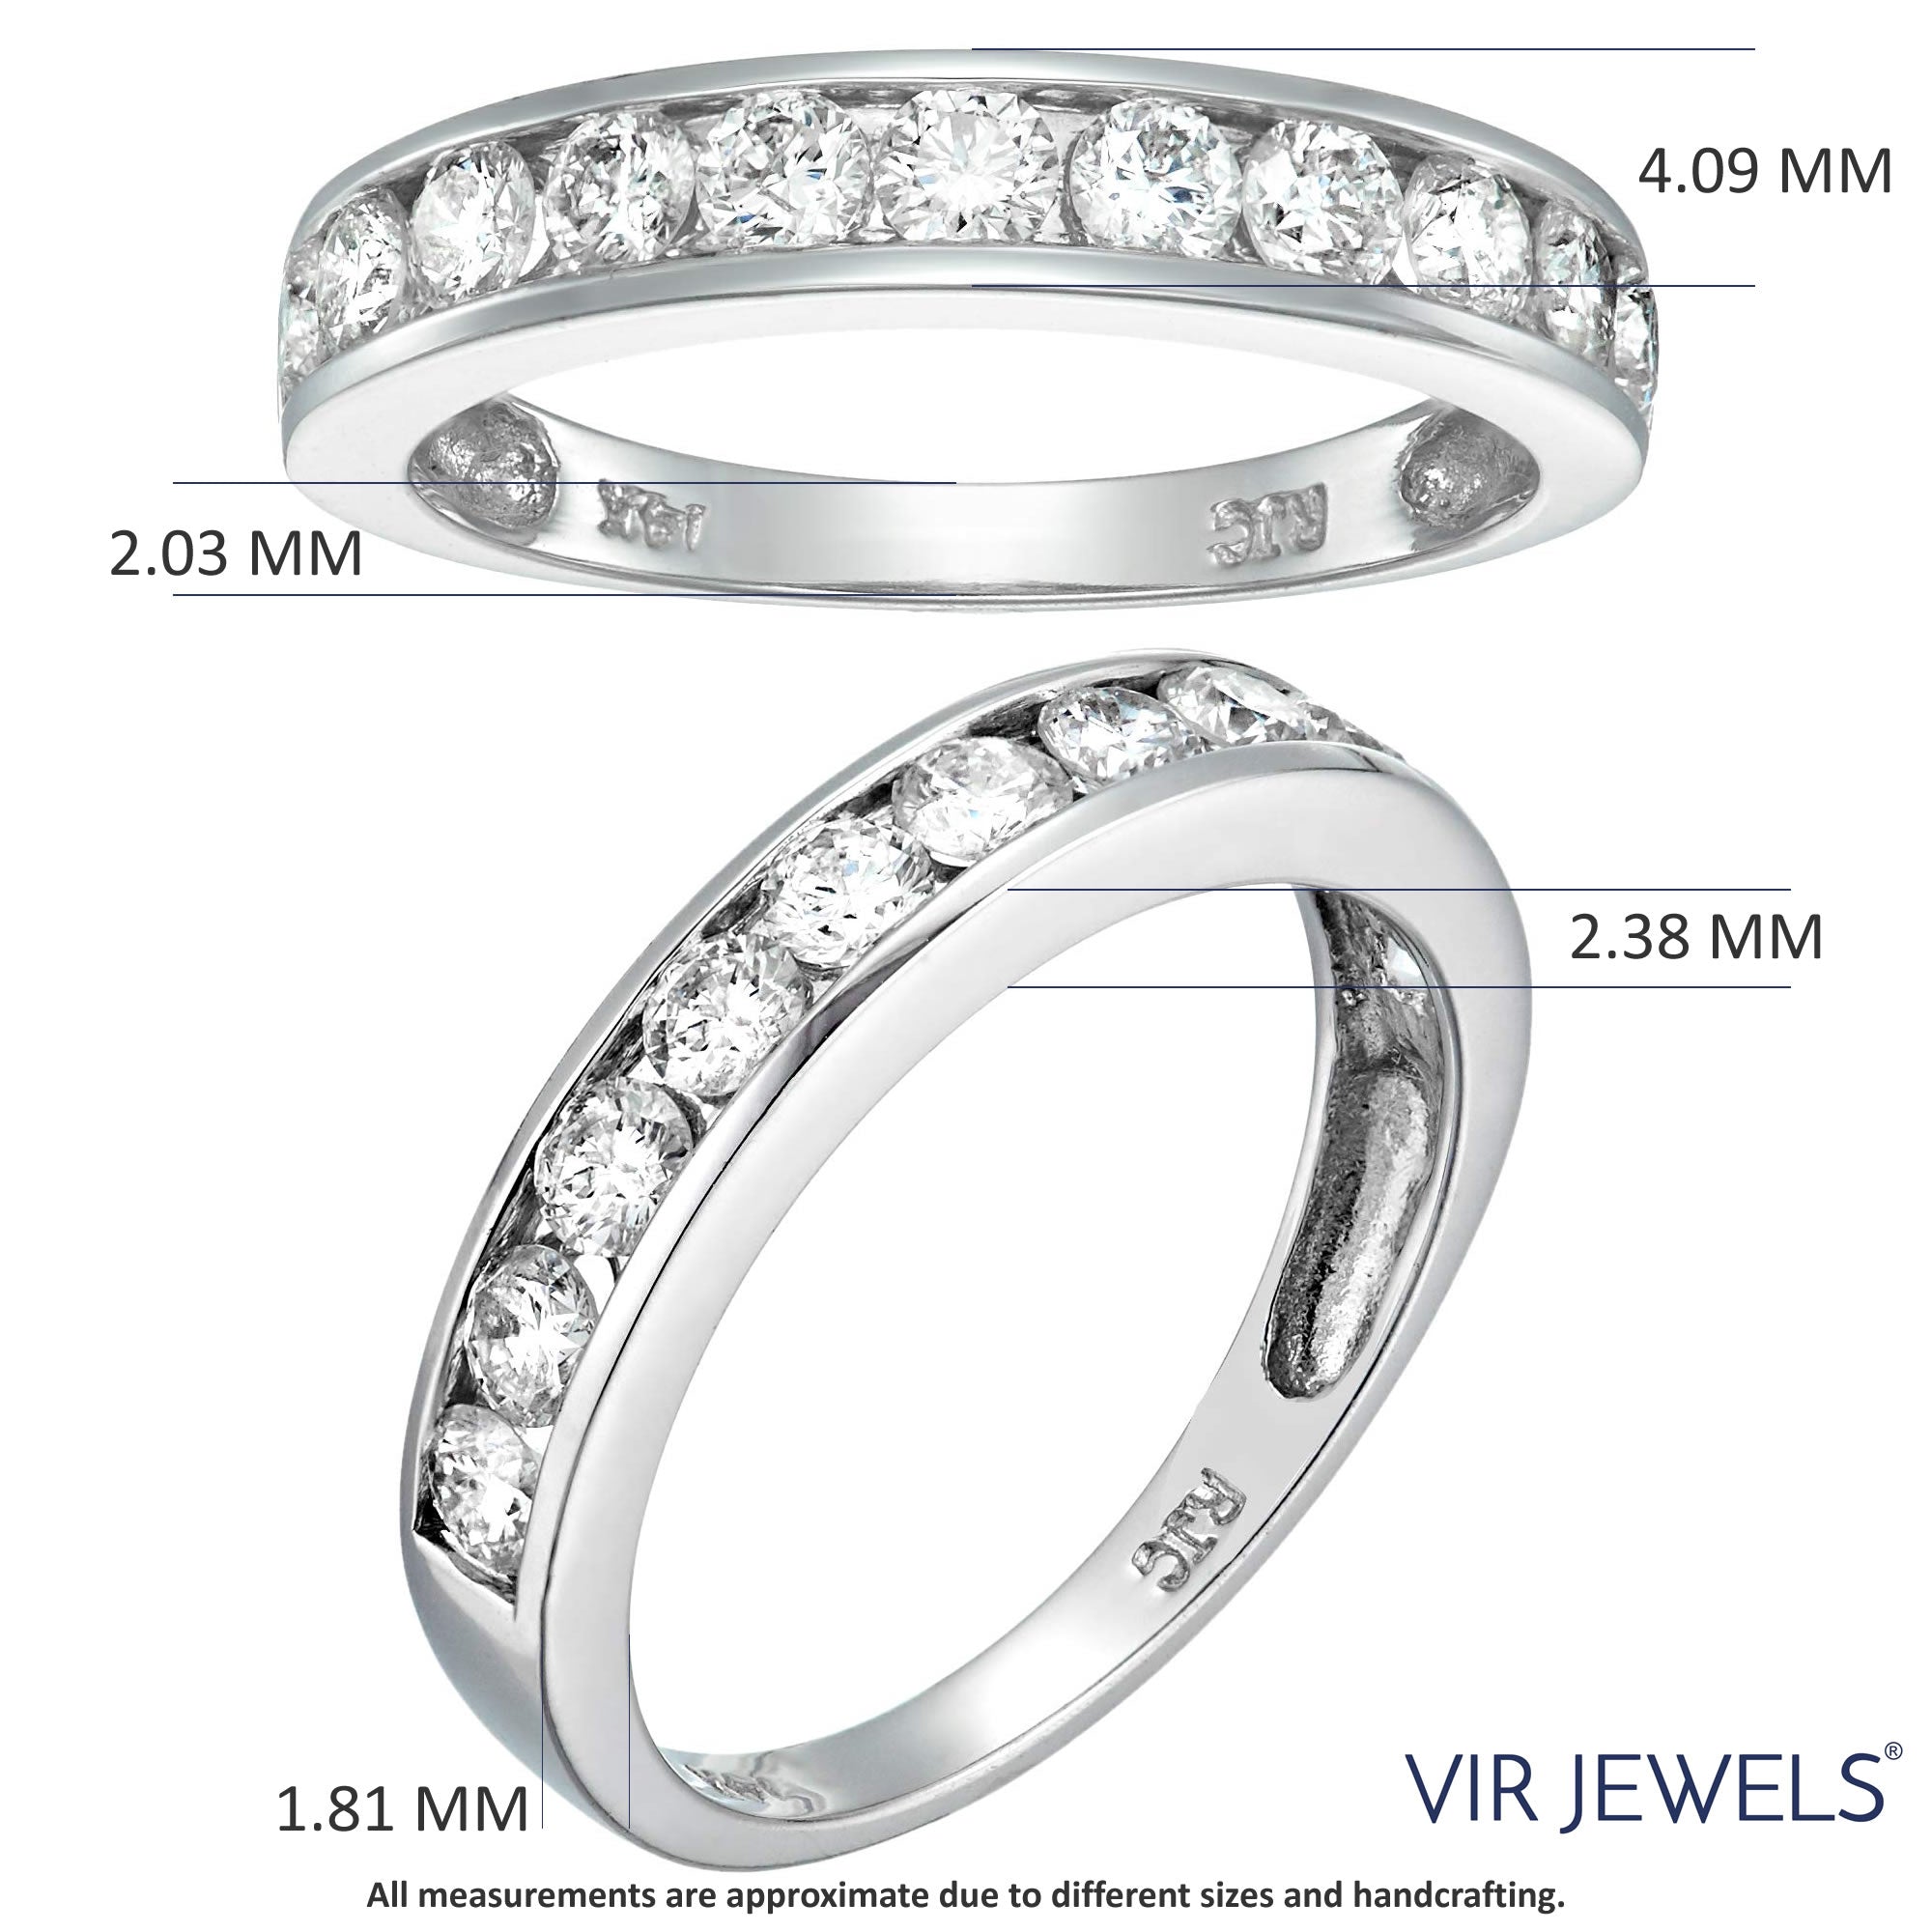 1 cttw Wedding Band for Women, 14K White Gold Classic Diamond Wedding Band in Channel Set, Size 4.5-10